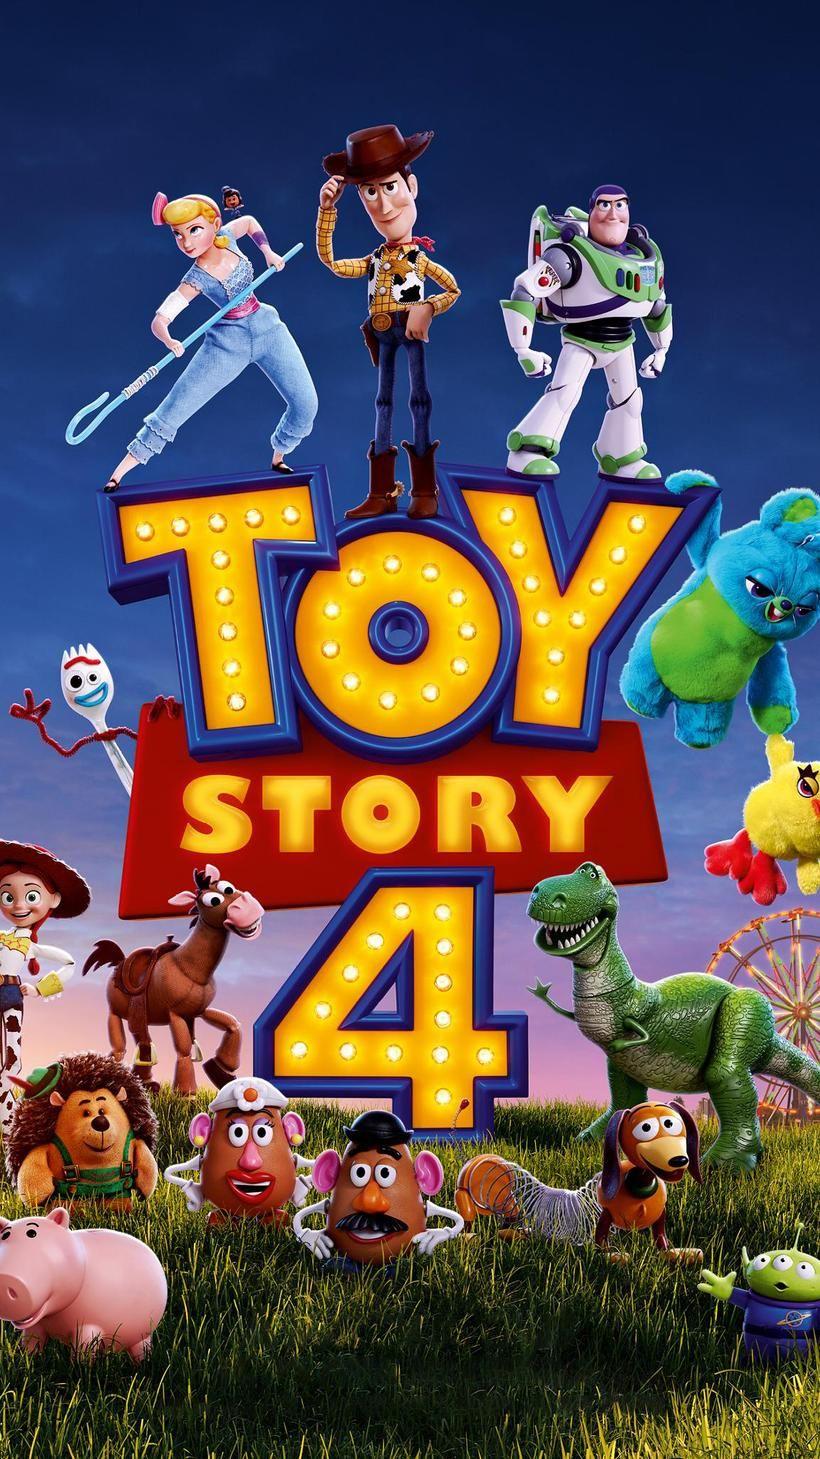 Toy Story 4 (2019) Phone Wallpaper. Disney. Movie posters, Toy